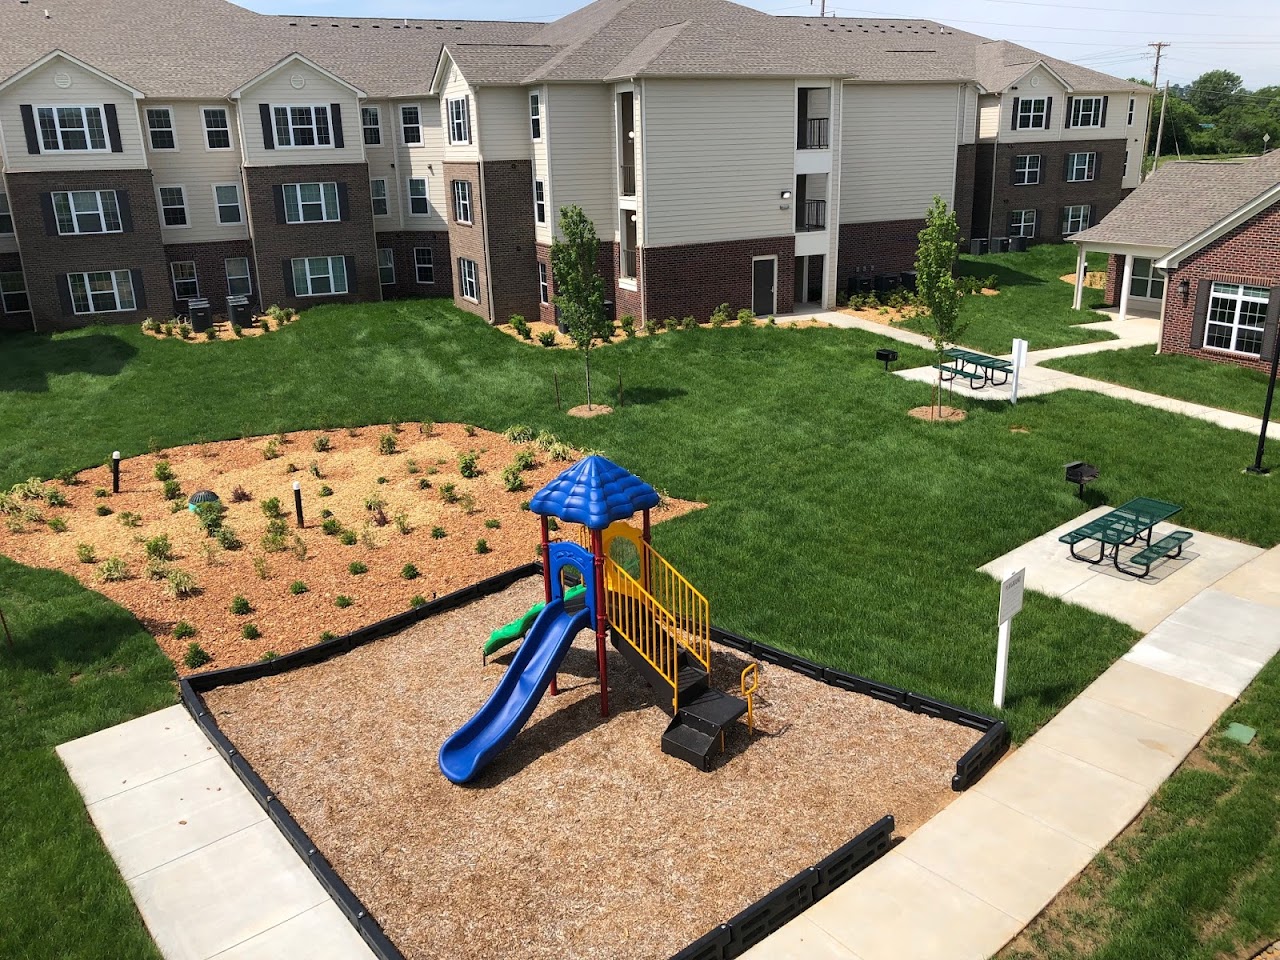 Photo of WOOD FALLS APARTMENTS. Affordable housing located at 201 CARVER LANE LEBANON, TN 37087